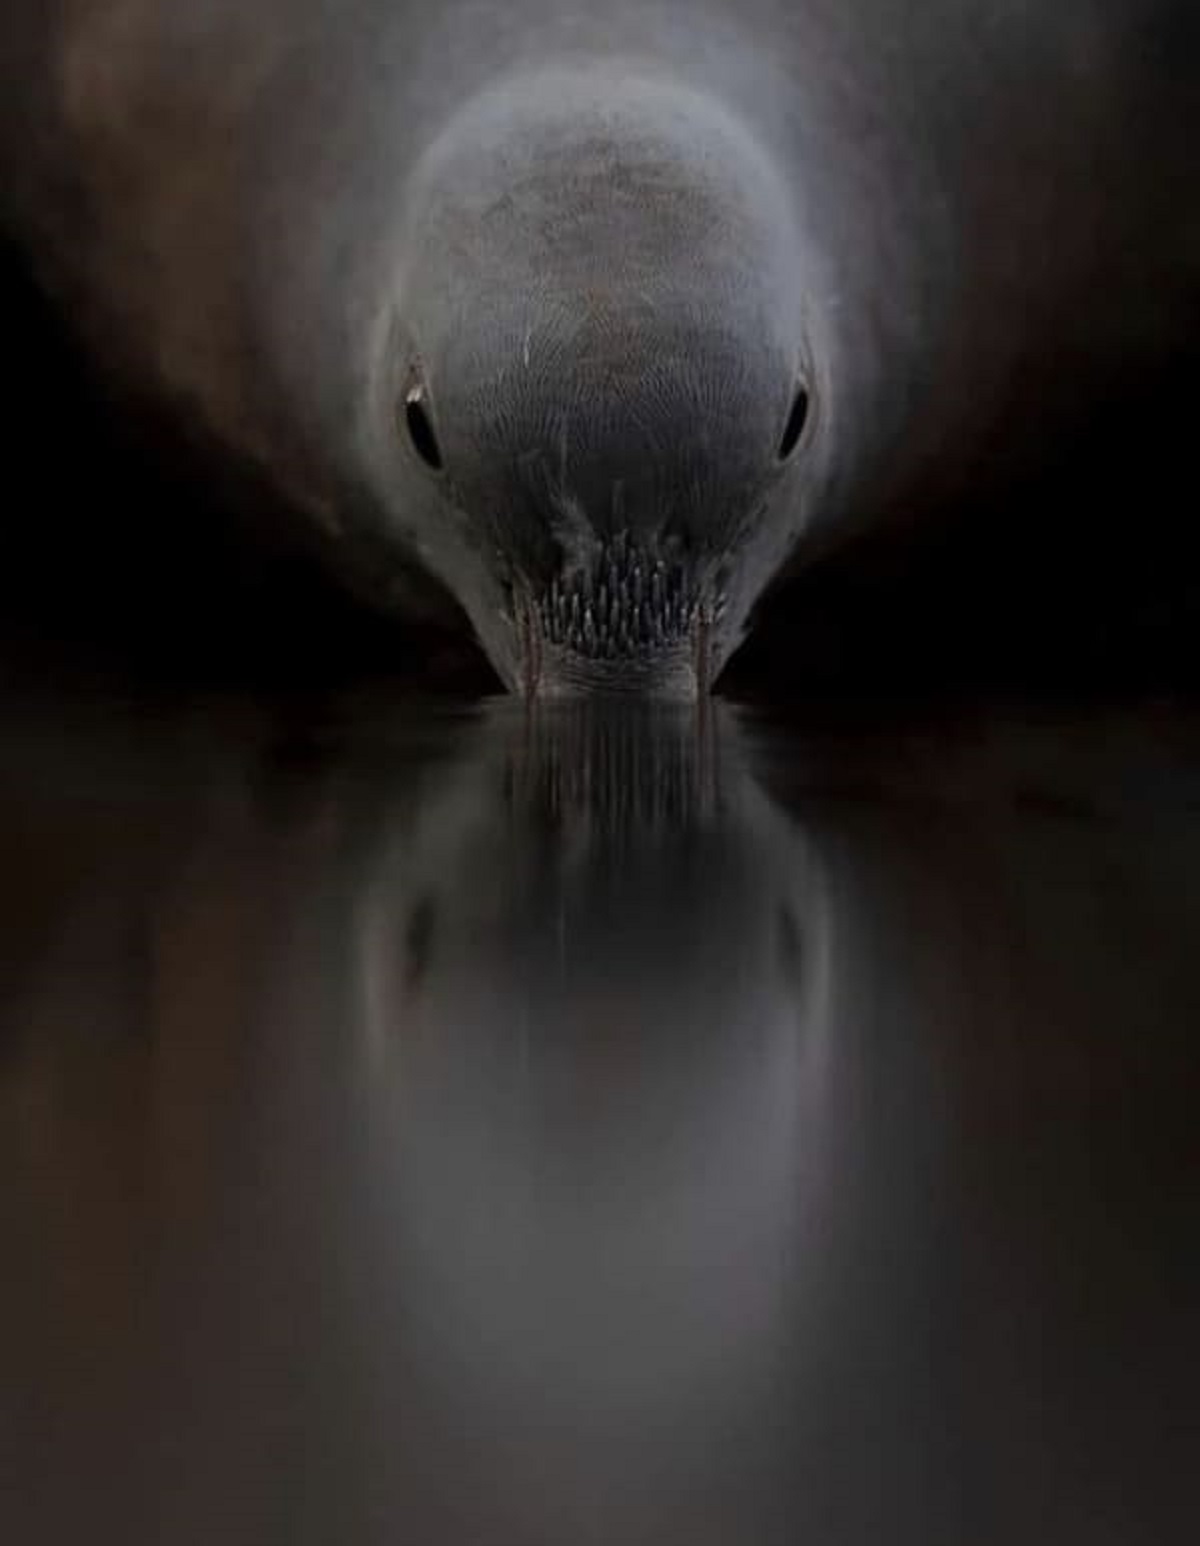 “A picture of a dove drinking water”